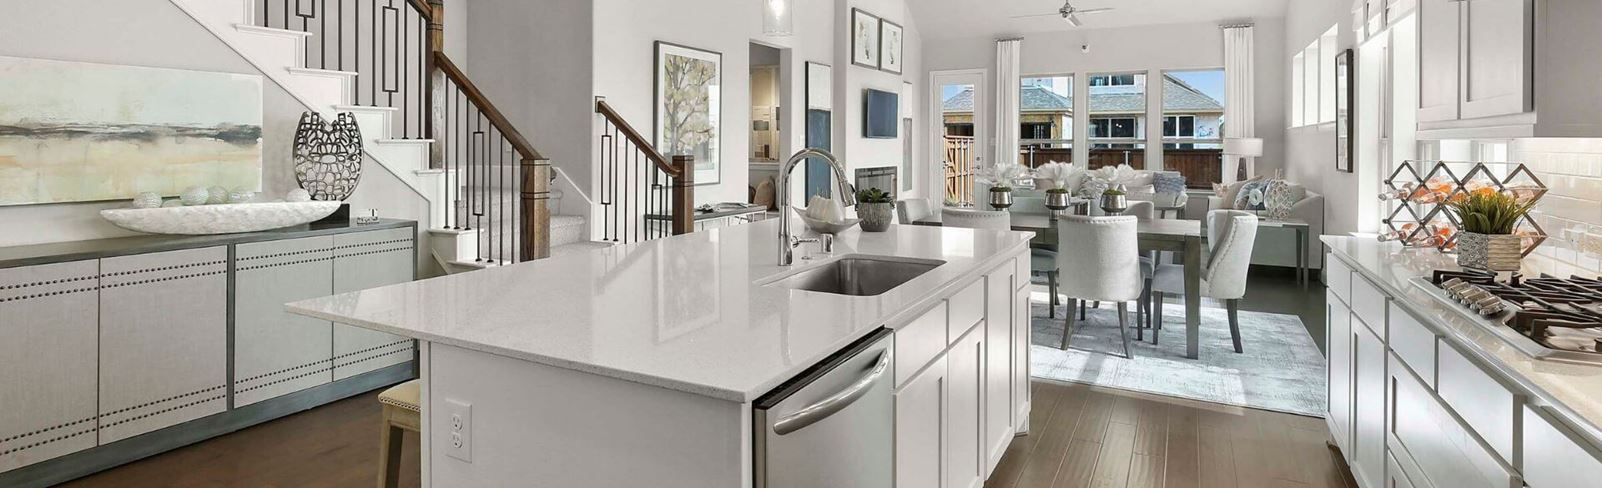 Trophy Signature Homes model kitchen at Hollyhock and coming soon to The Grove Frisco